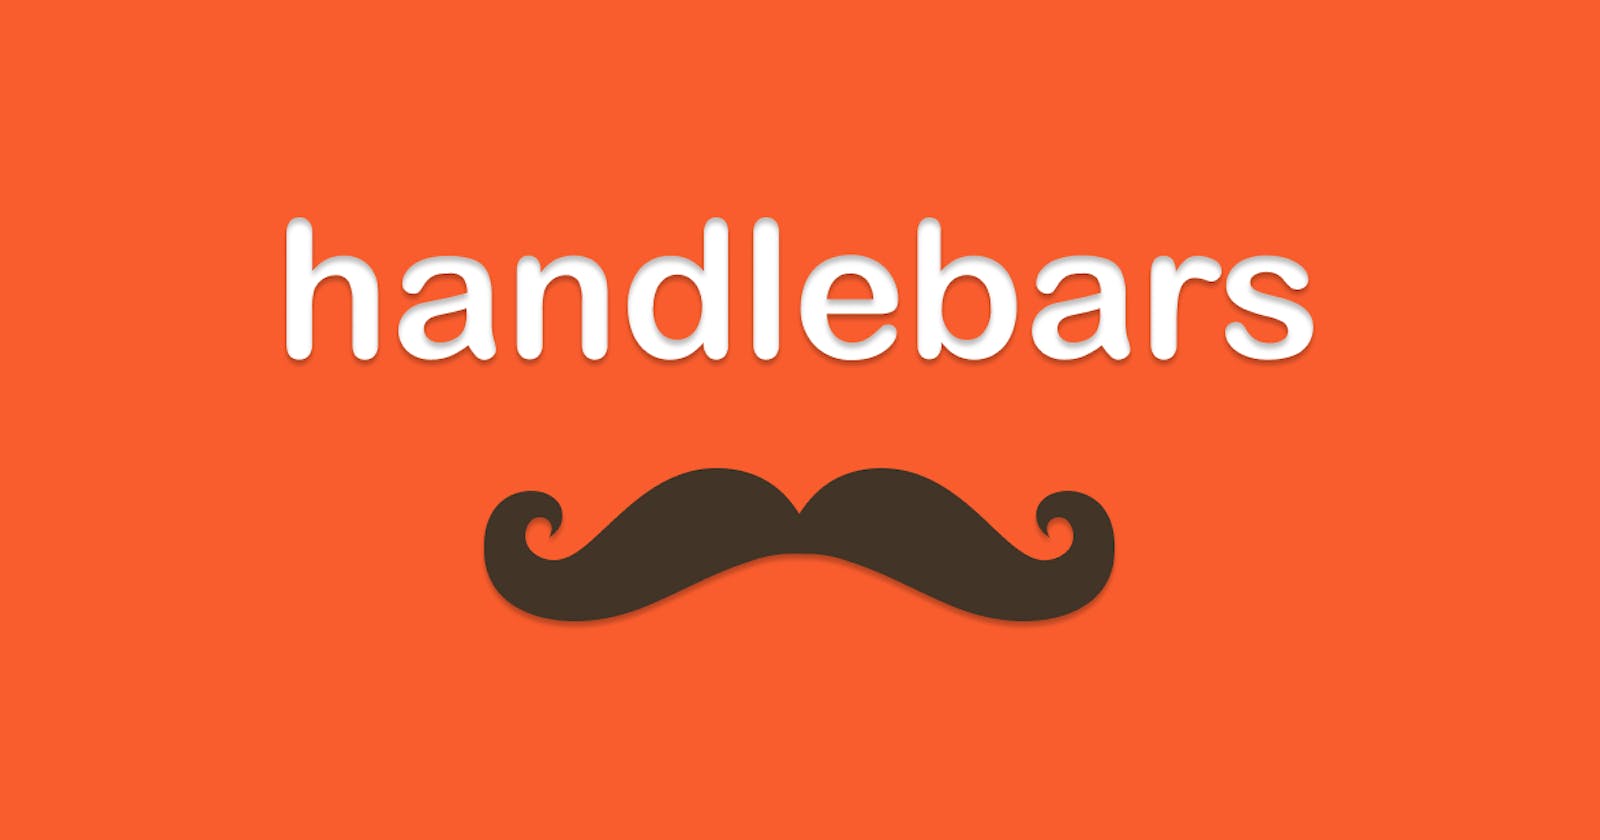 How to install and use Handlebars with express